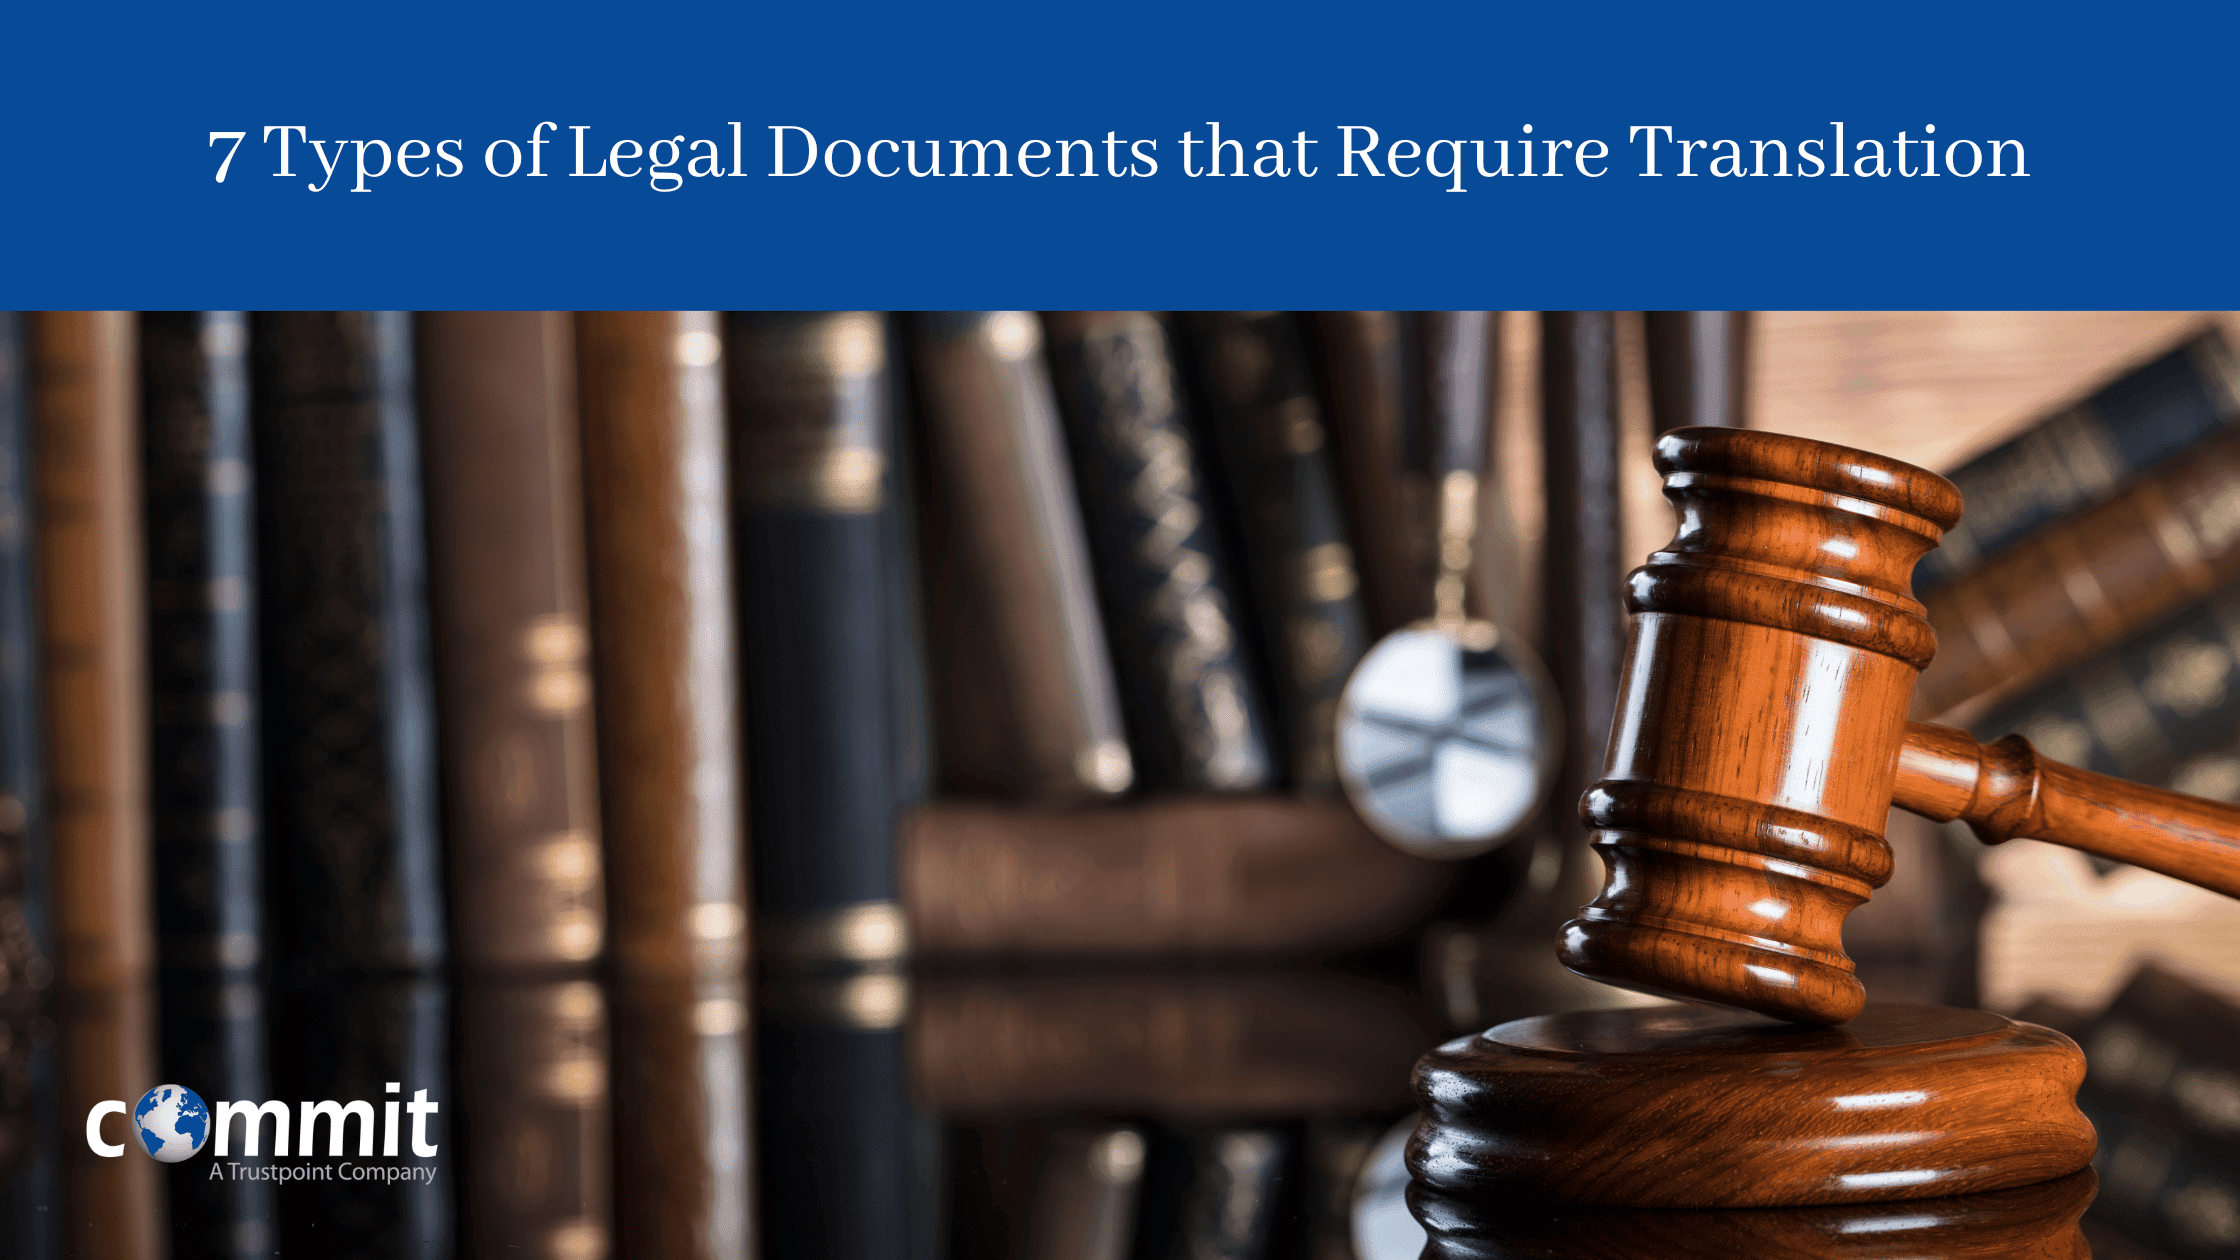 7 Types of Legal Documents that Require Translation